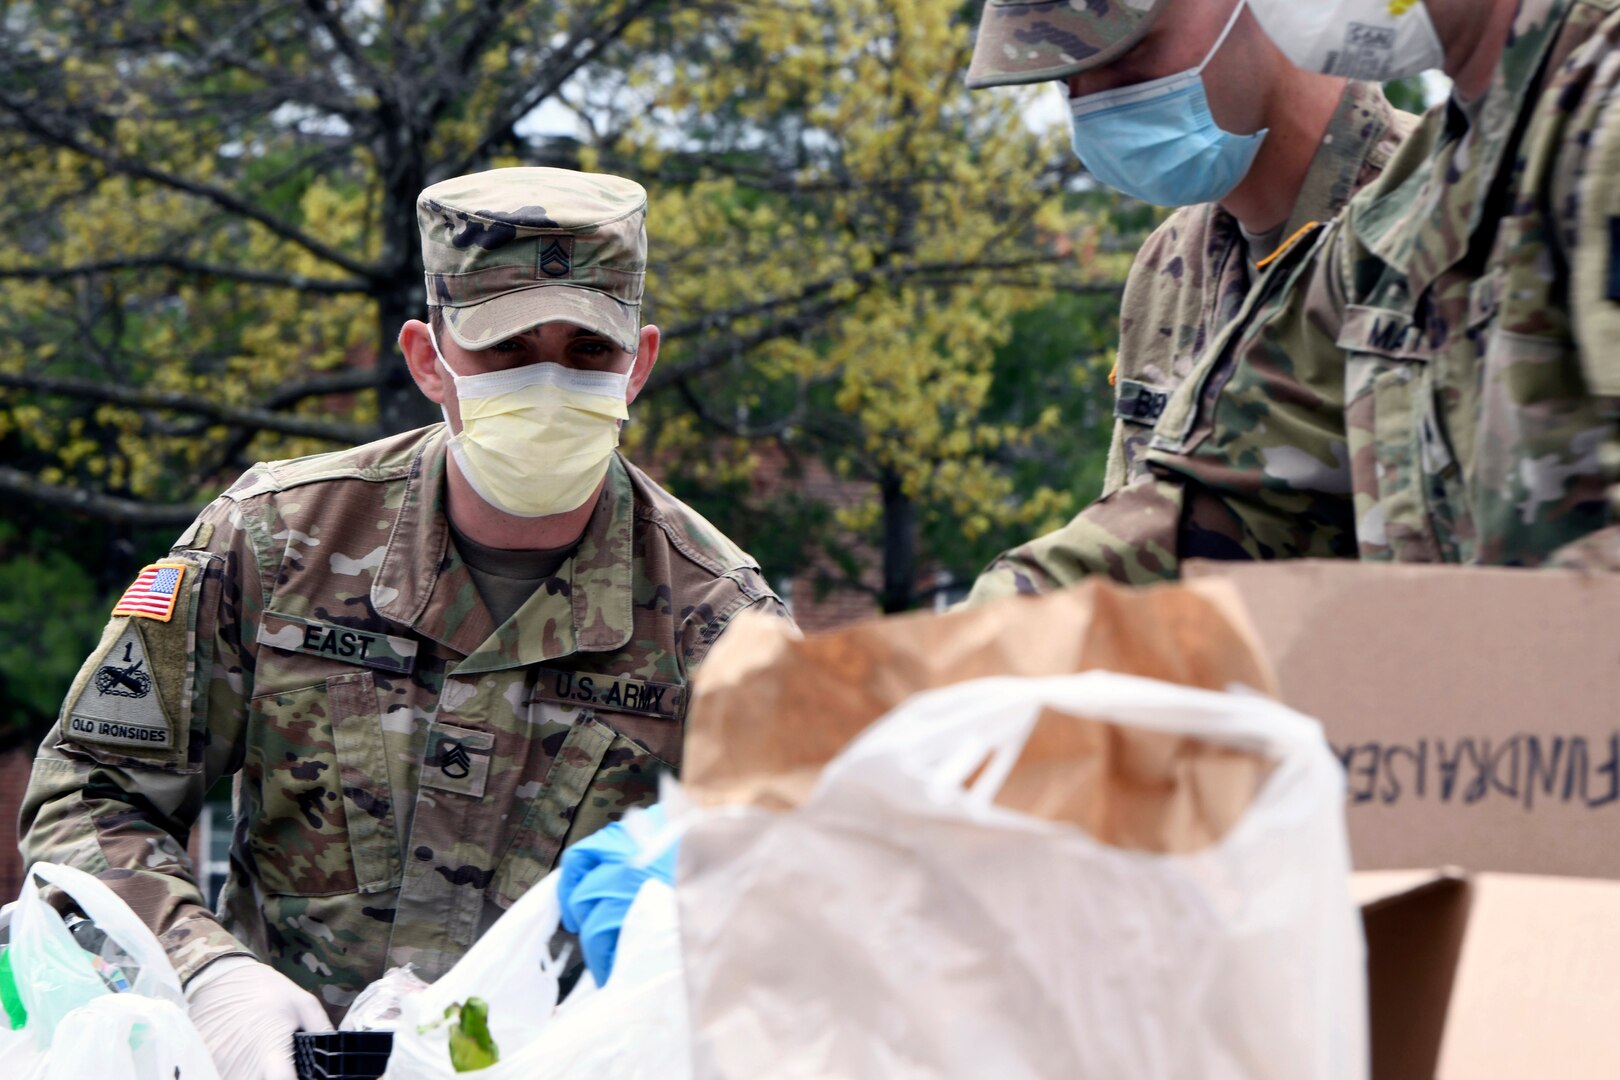 Army Staff Sgt. Bryant East, a squad leader with the Maryland Army National Guard’s Company A, 1st Battalion, 175th Infantry Regiment, helps organize food and toiletries at a parking lot in Frederick, Maryland, April 23, 2020, while distributing food to those who need it as part of COVID-19 response efforts. East, along with approximately 30 other Soldiers from the unit, were augmenting food bank volunteers and staff members.